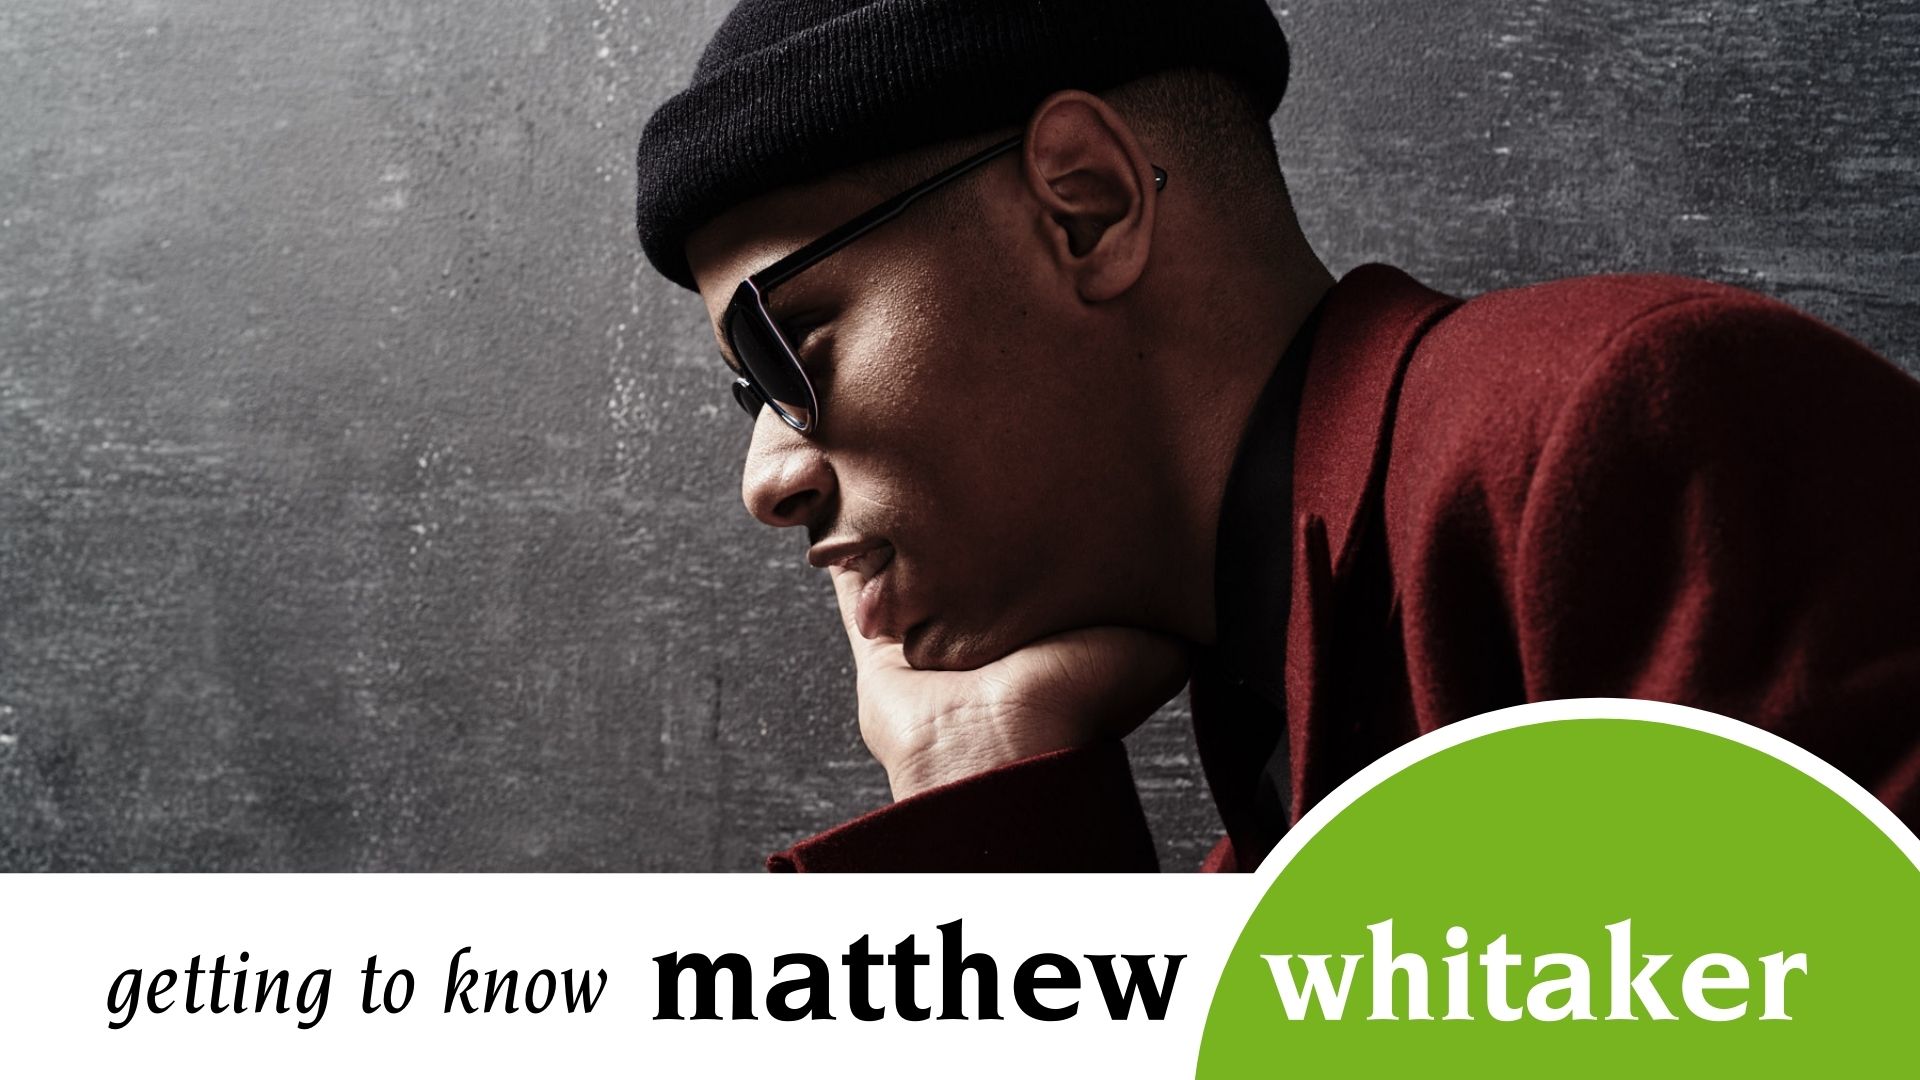 Matthew Whitaker facing the side in a thinking position - get to know him